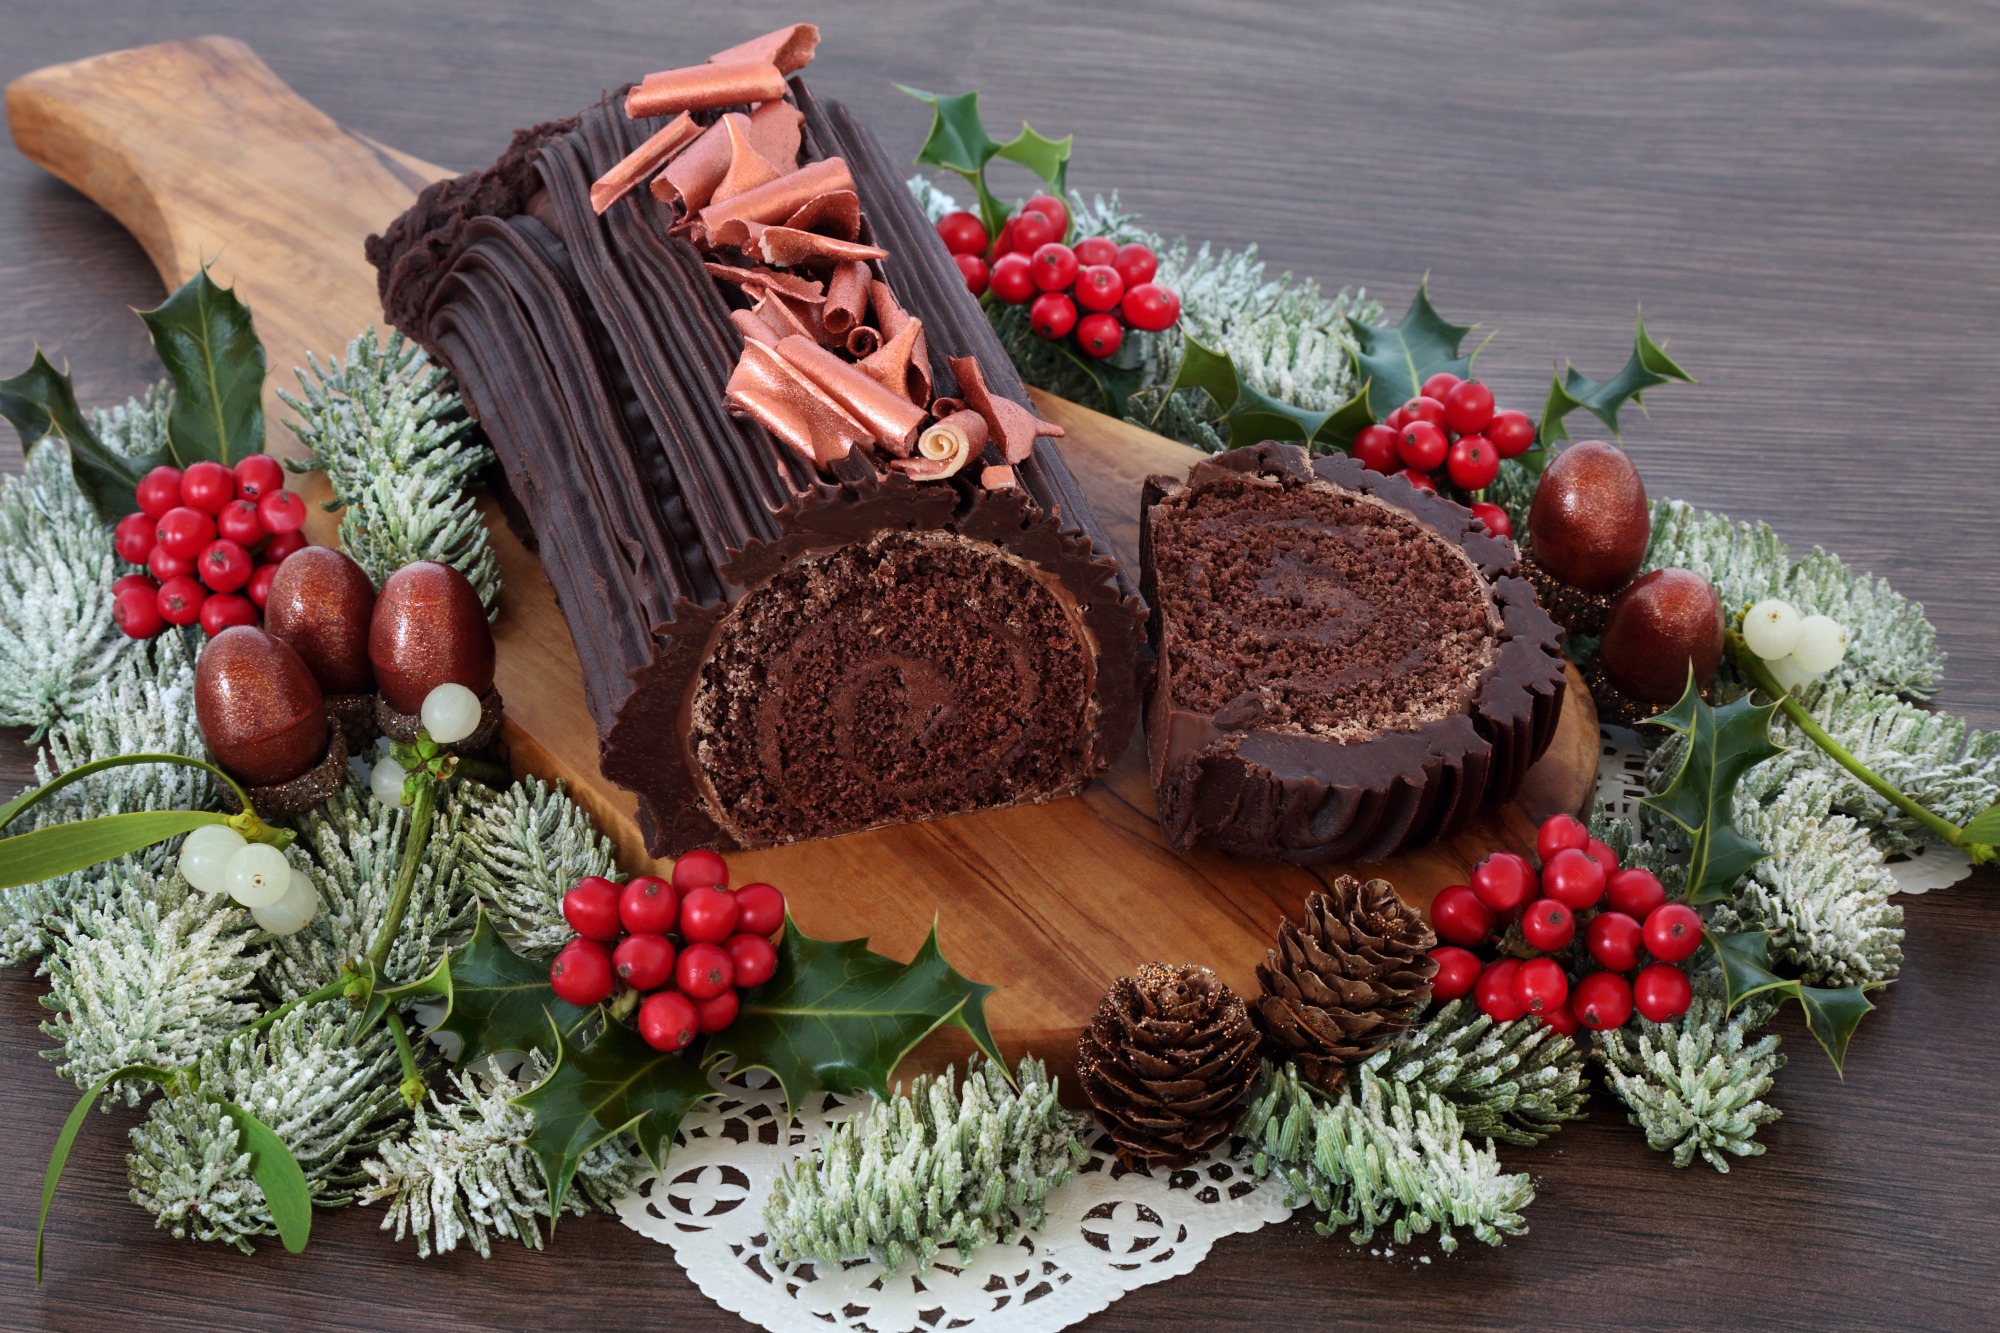 A completed chocolate yule log &copy; marilyna | 123RF.com